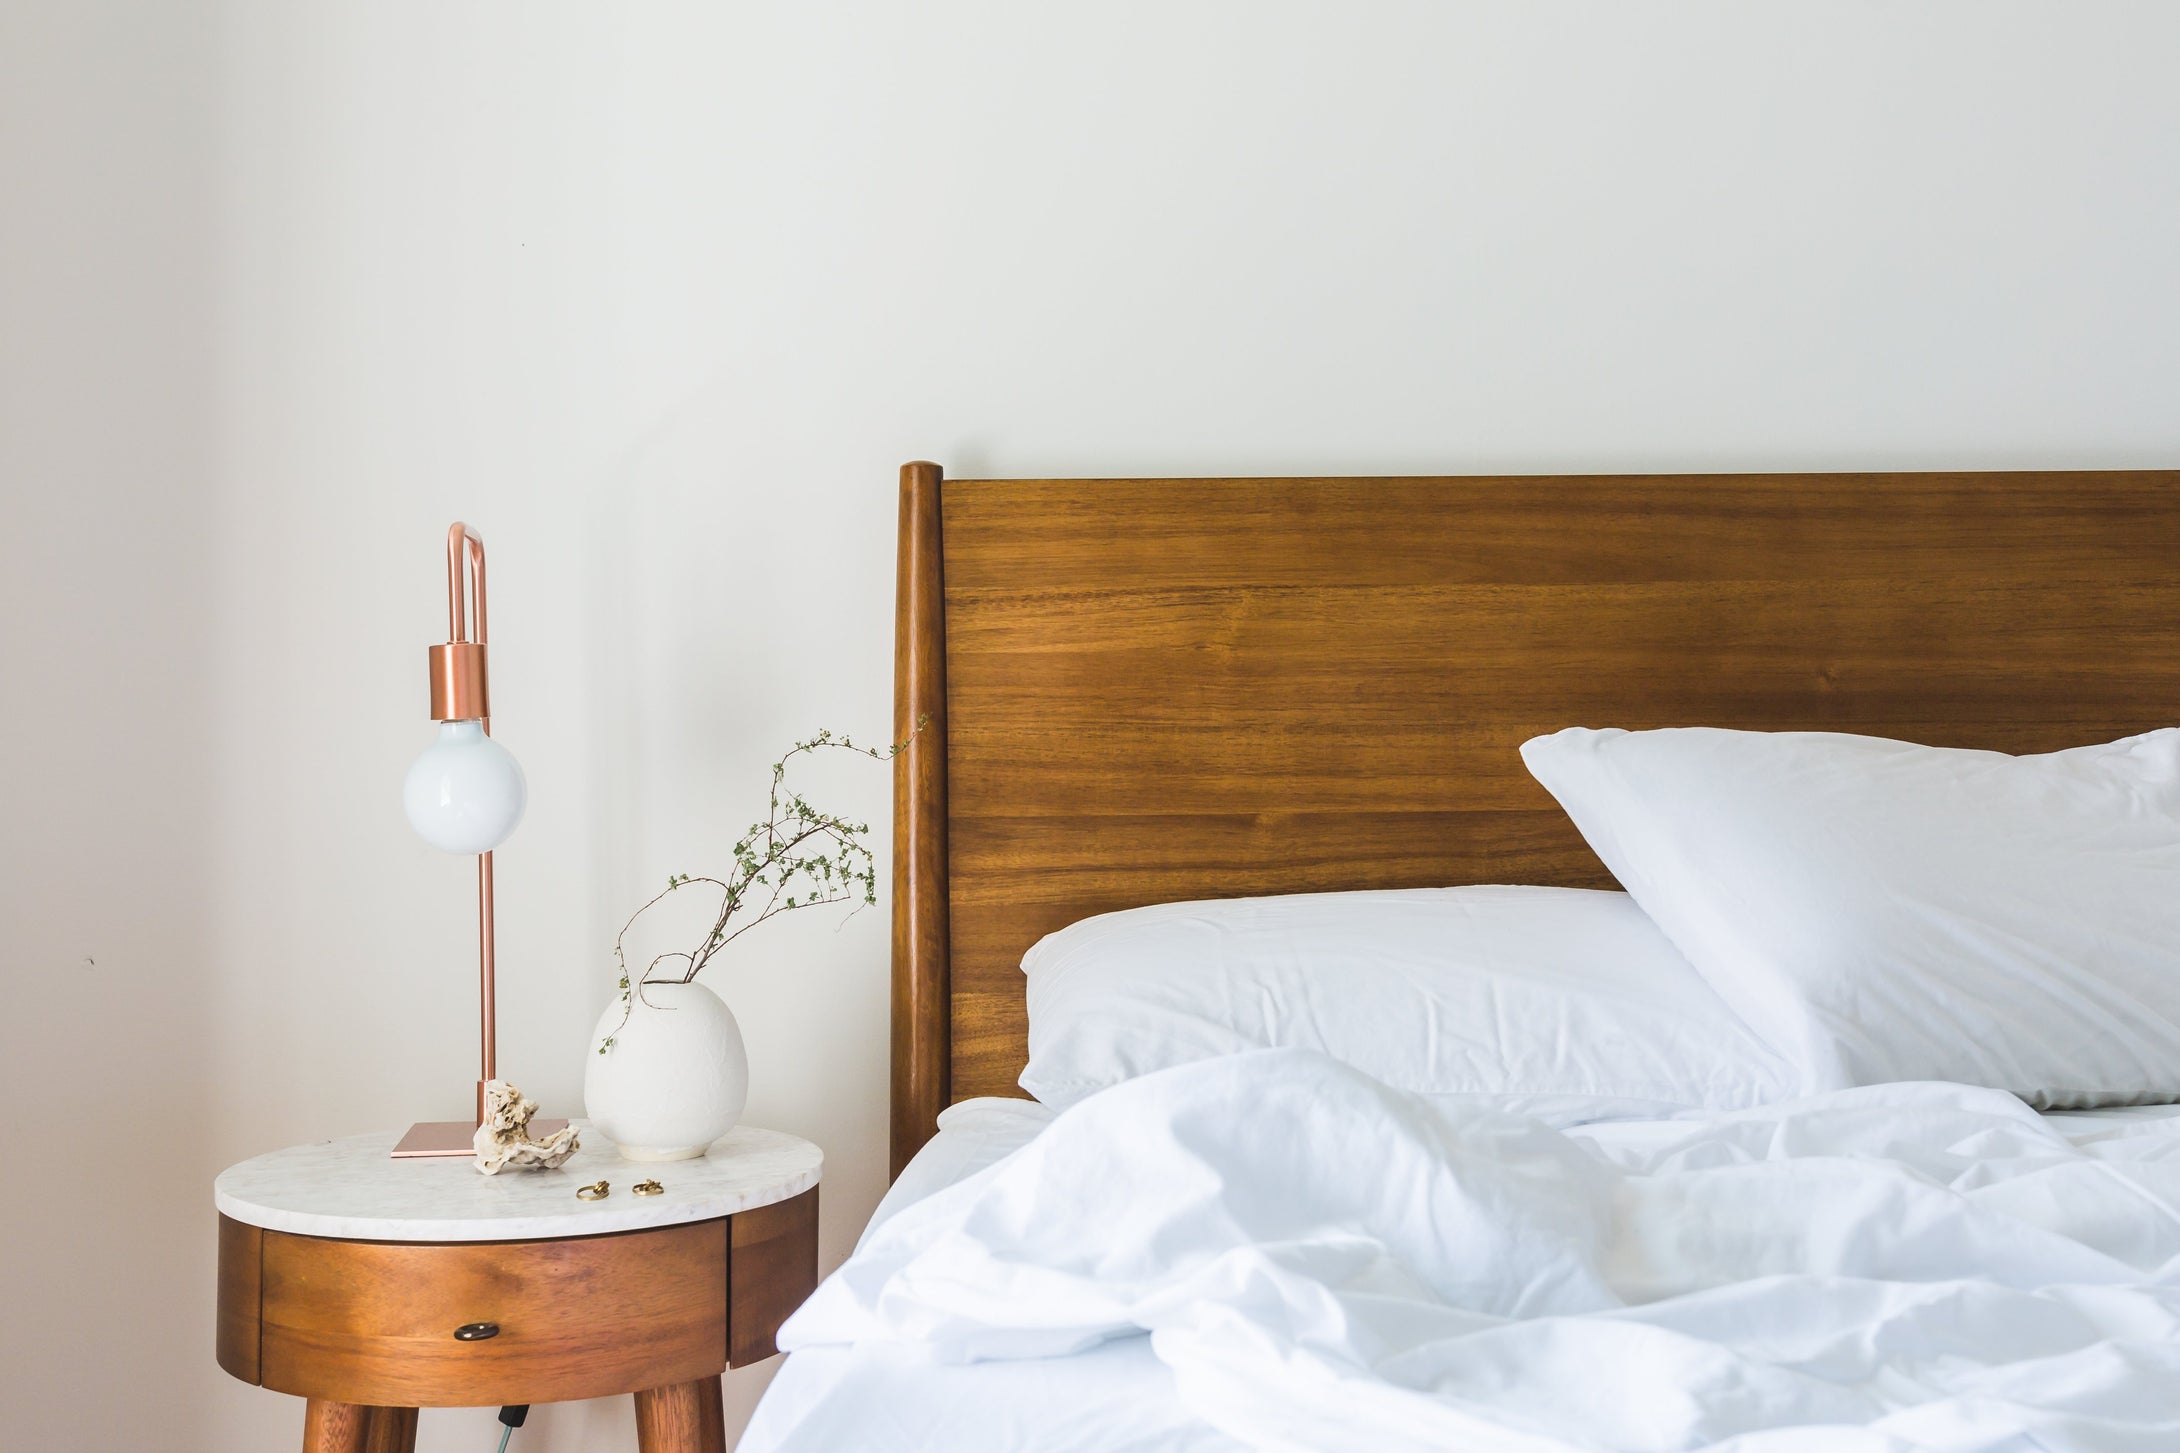 Adding a copper table lamp into a bedroom can add a feeling of warmth and softness. This image shows how a copper table lamp can work within a Scandinavian style modern bedroom interior within a home.